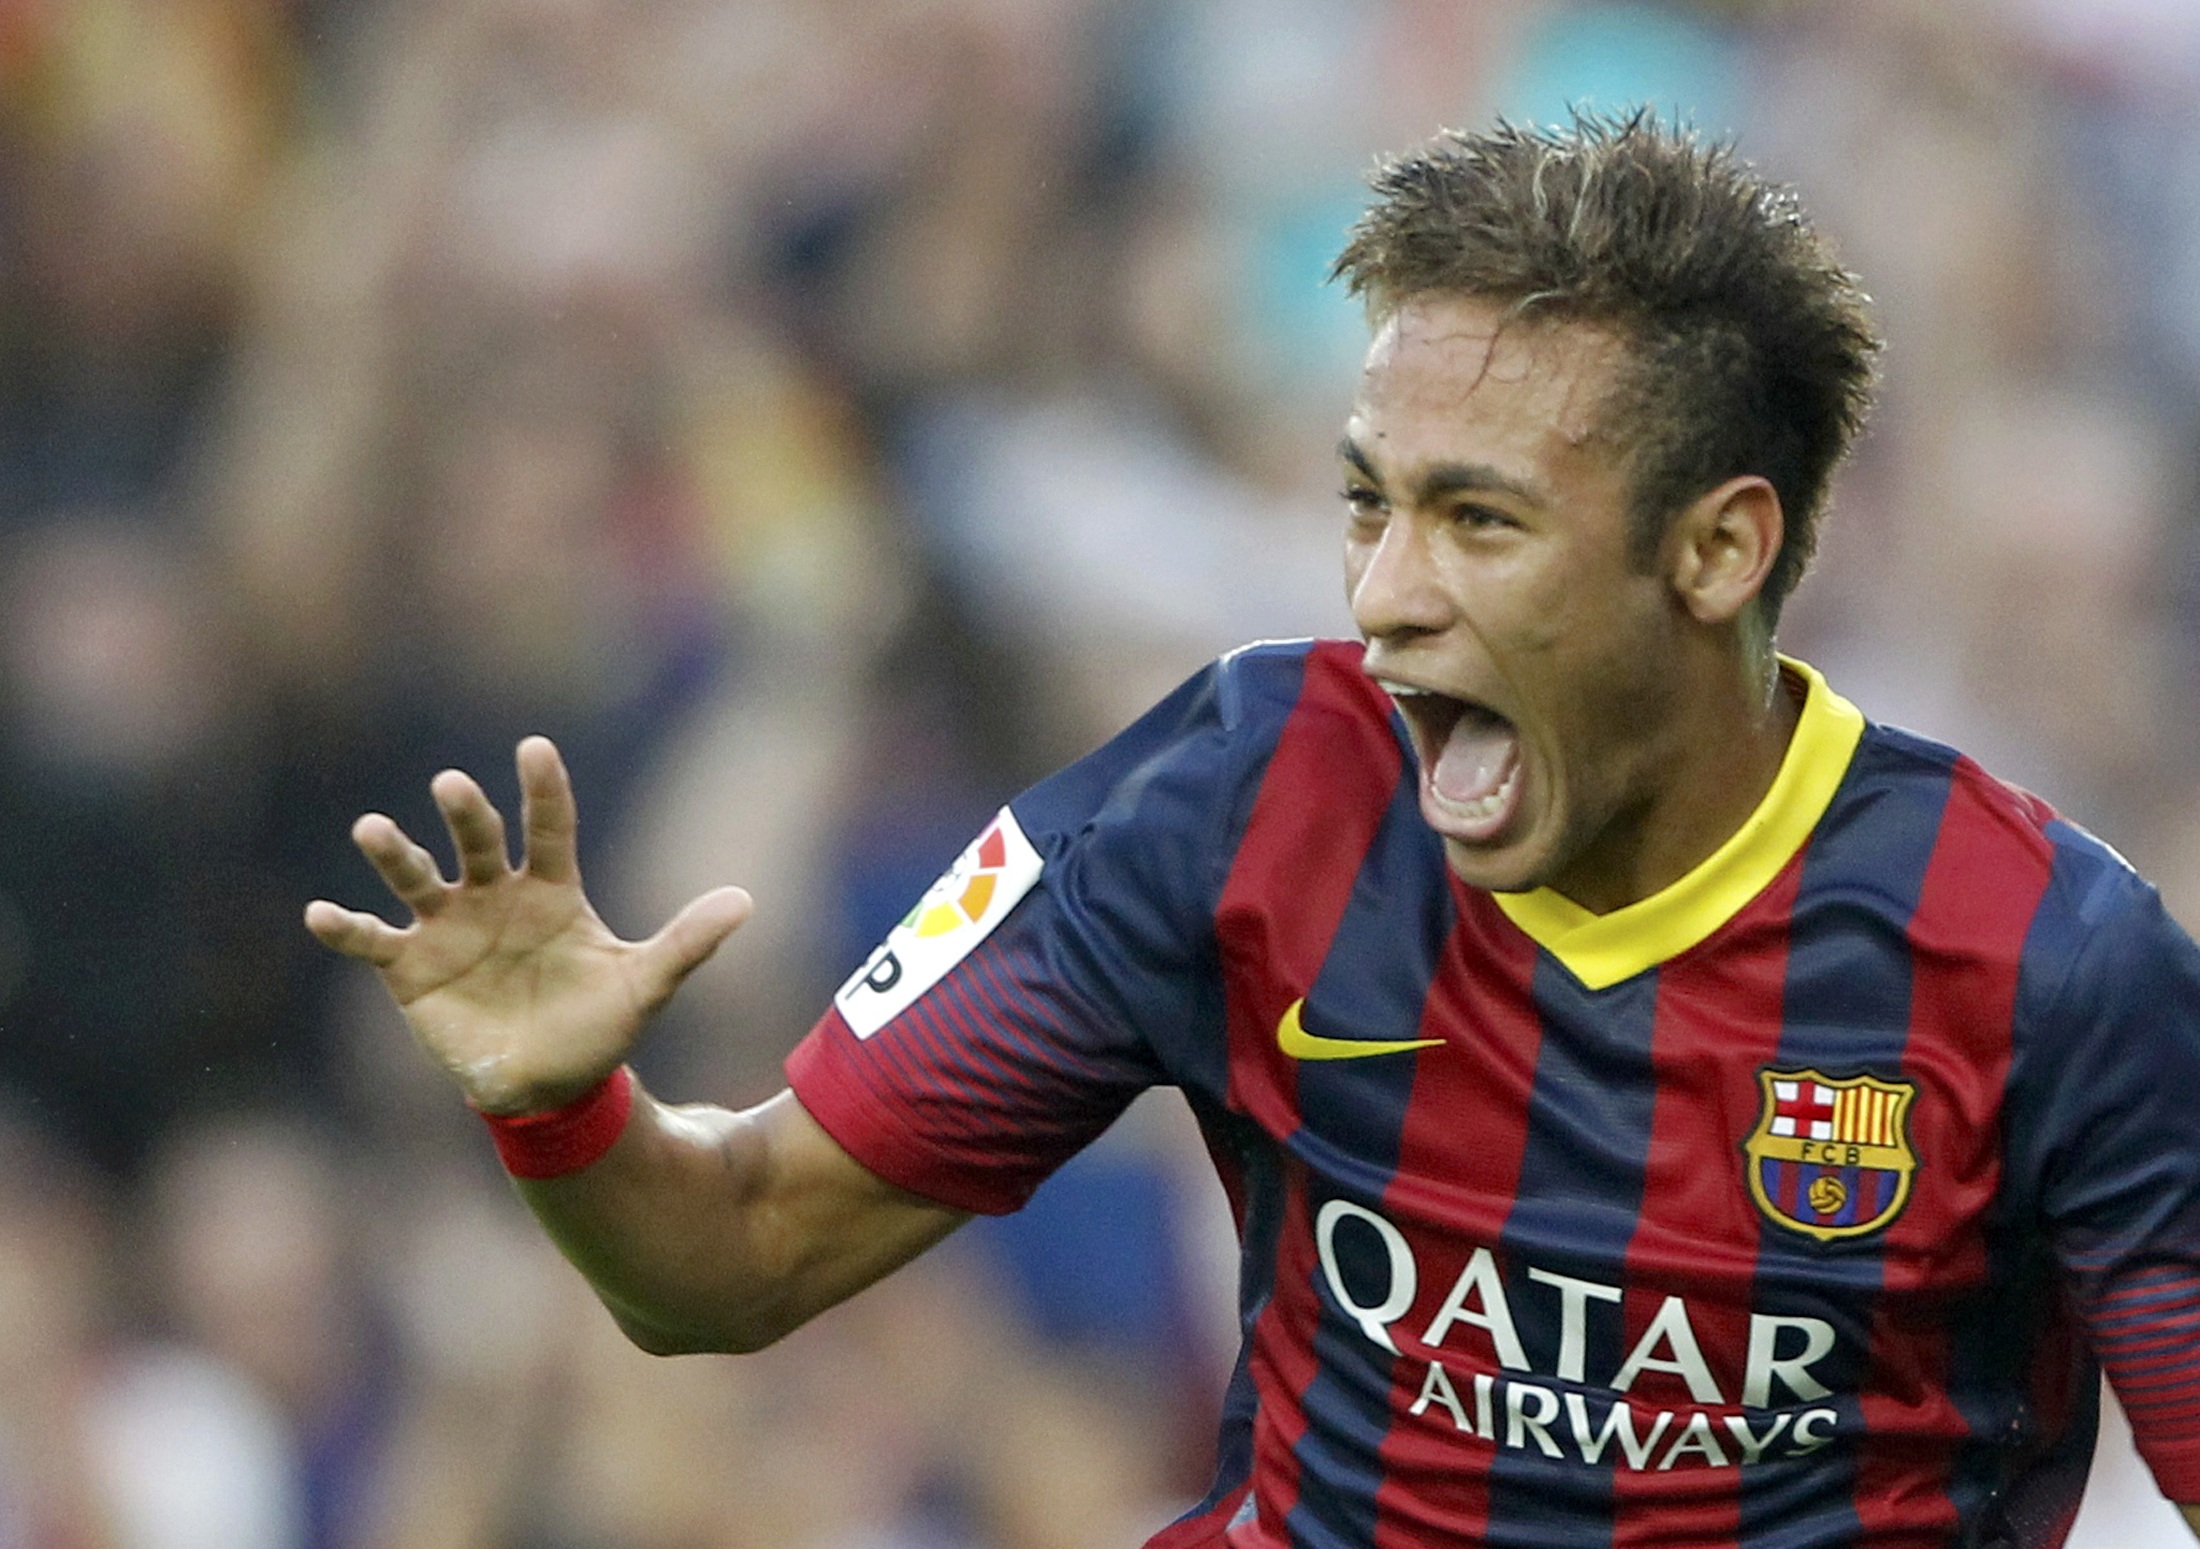 Barcelona's Neymar celebrates after scoring a goal against Real Madrid during their Spanish first division "Clasico" soccer match at Nou Camp stadium in Barcelona October 26, 2013. REUTERS/Albert Gea (SPAIN - Tags: SPORT SOCCER TPX IMAGES OF THE DAY)